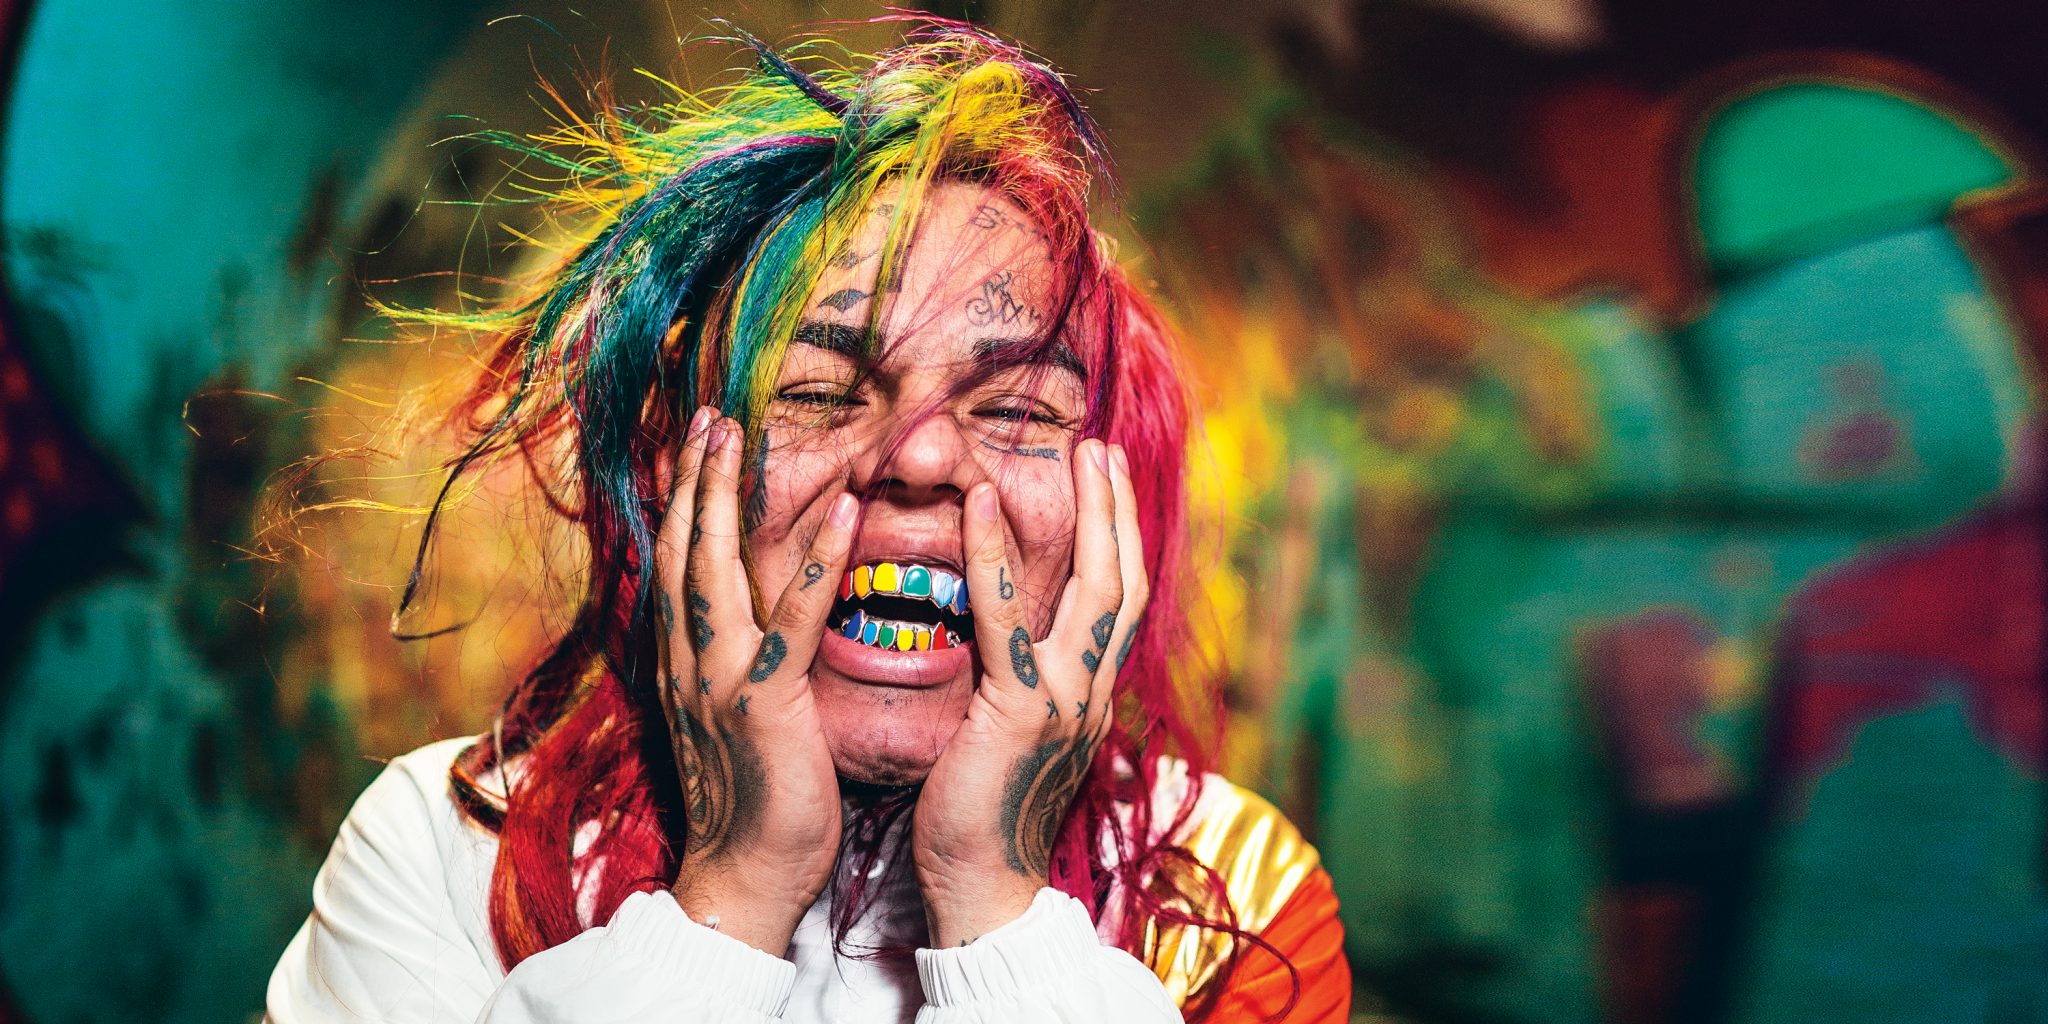 6ix9ine Out of Prison; Out With New Song. Listen Indigo Music